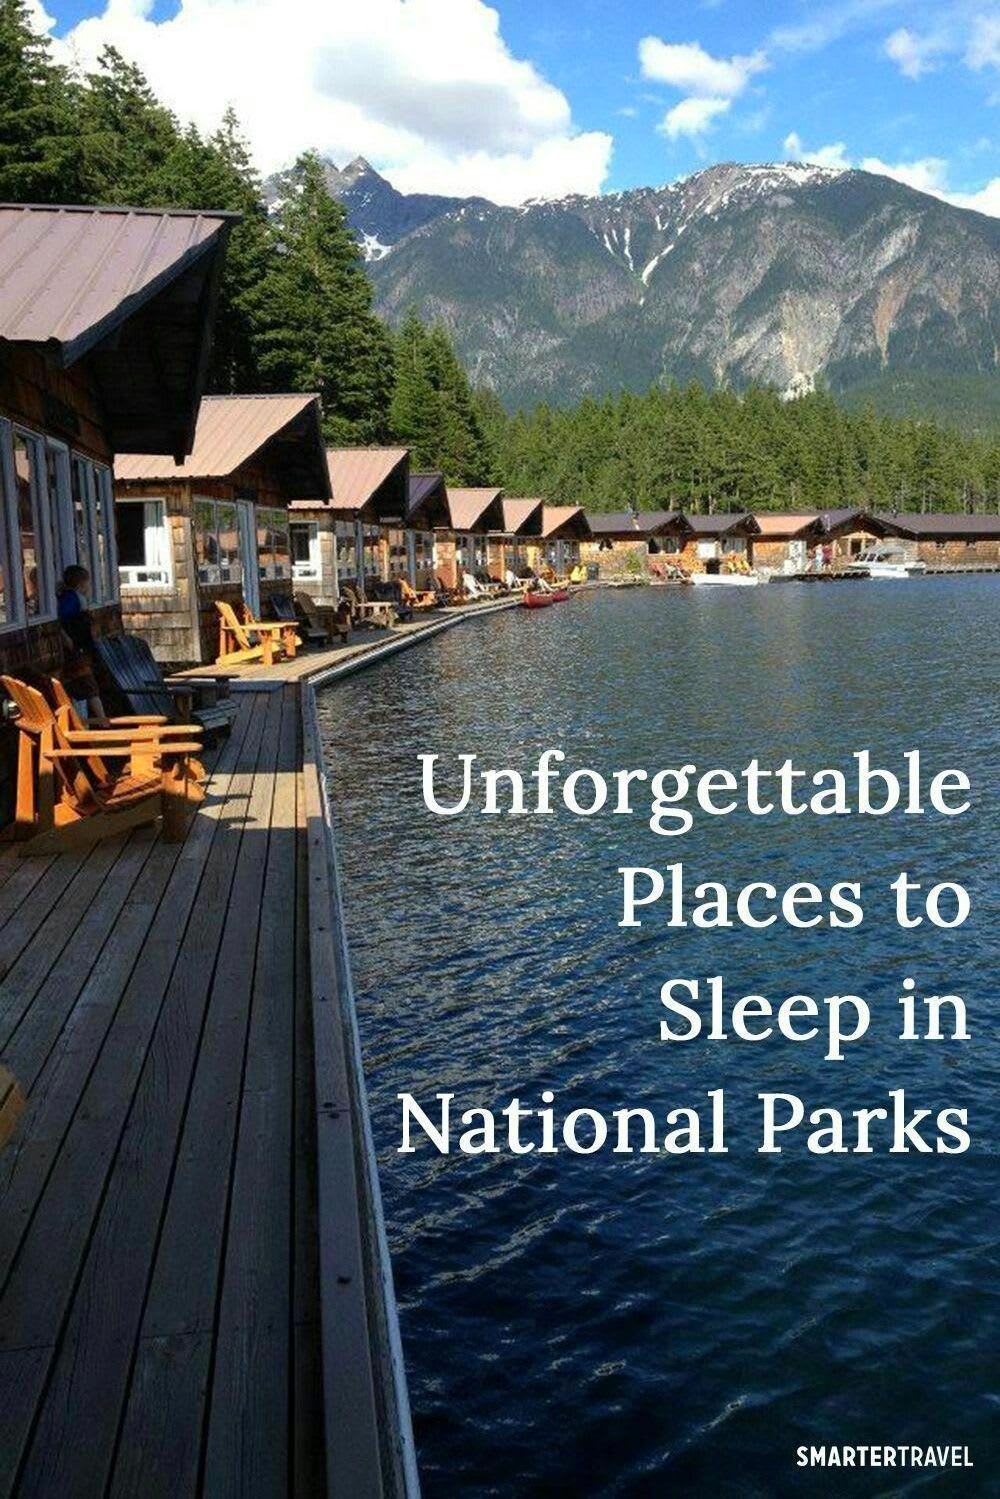 10 Unforgettable Places to Sleep in National Parks - US vacation